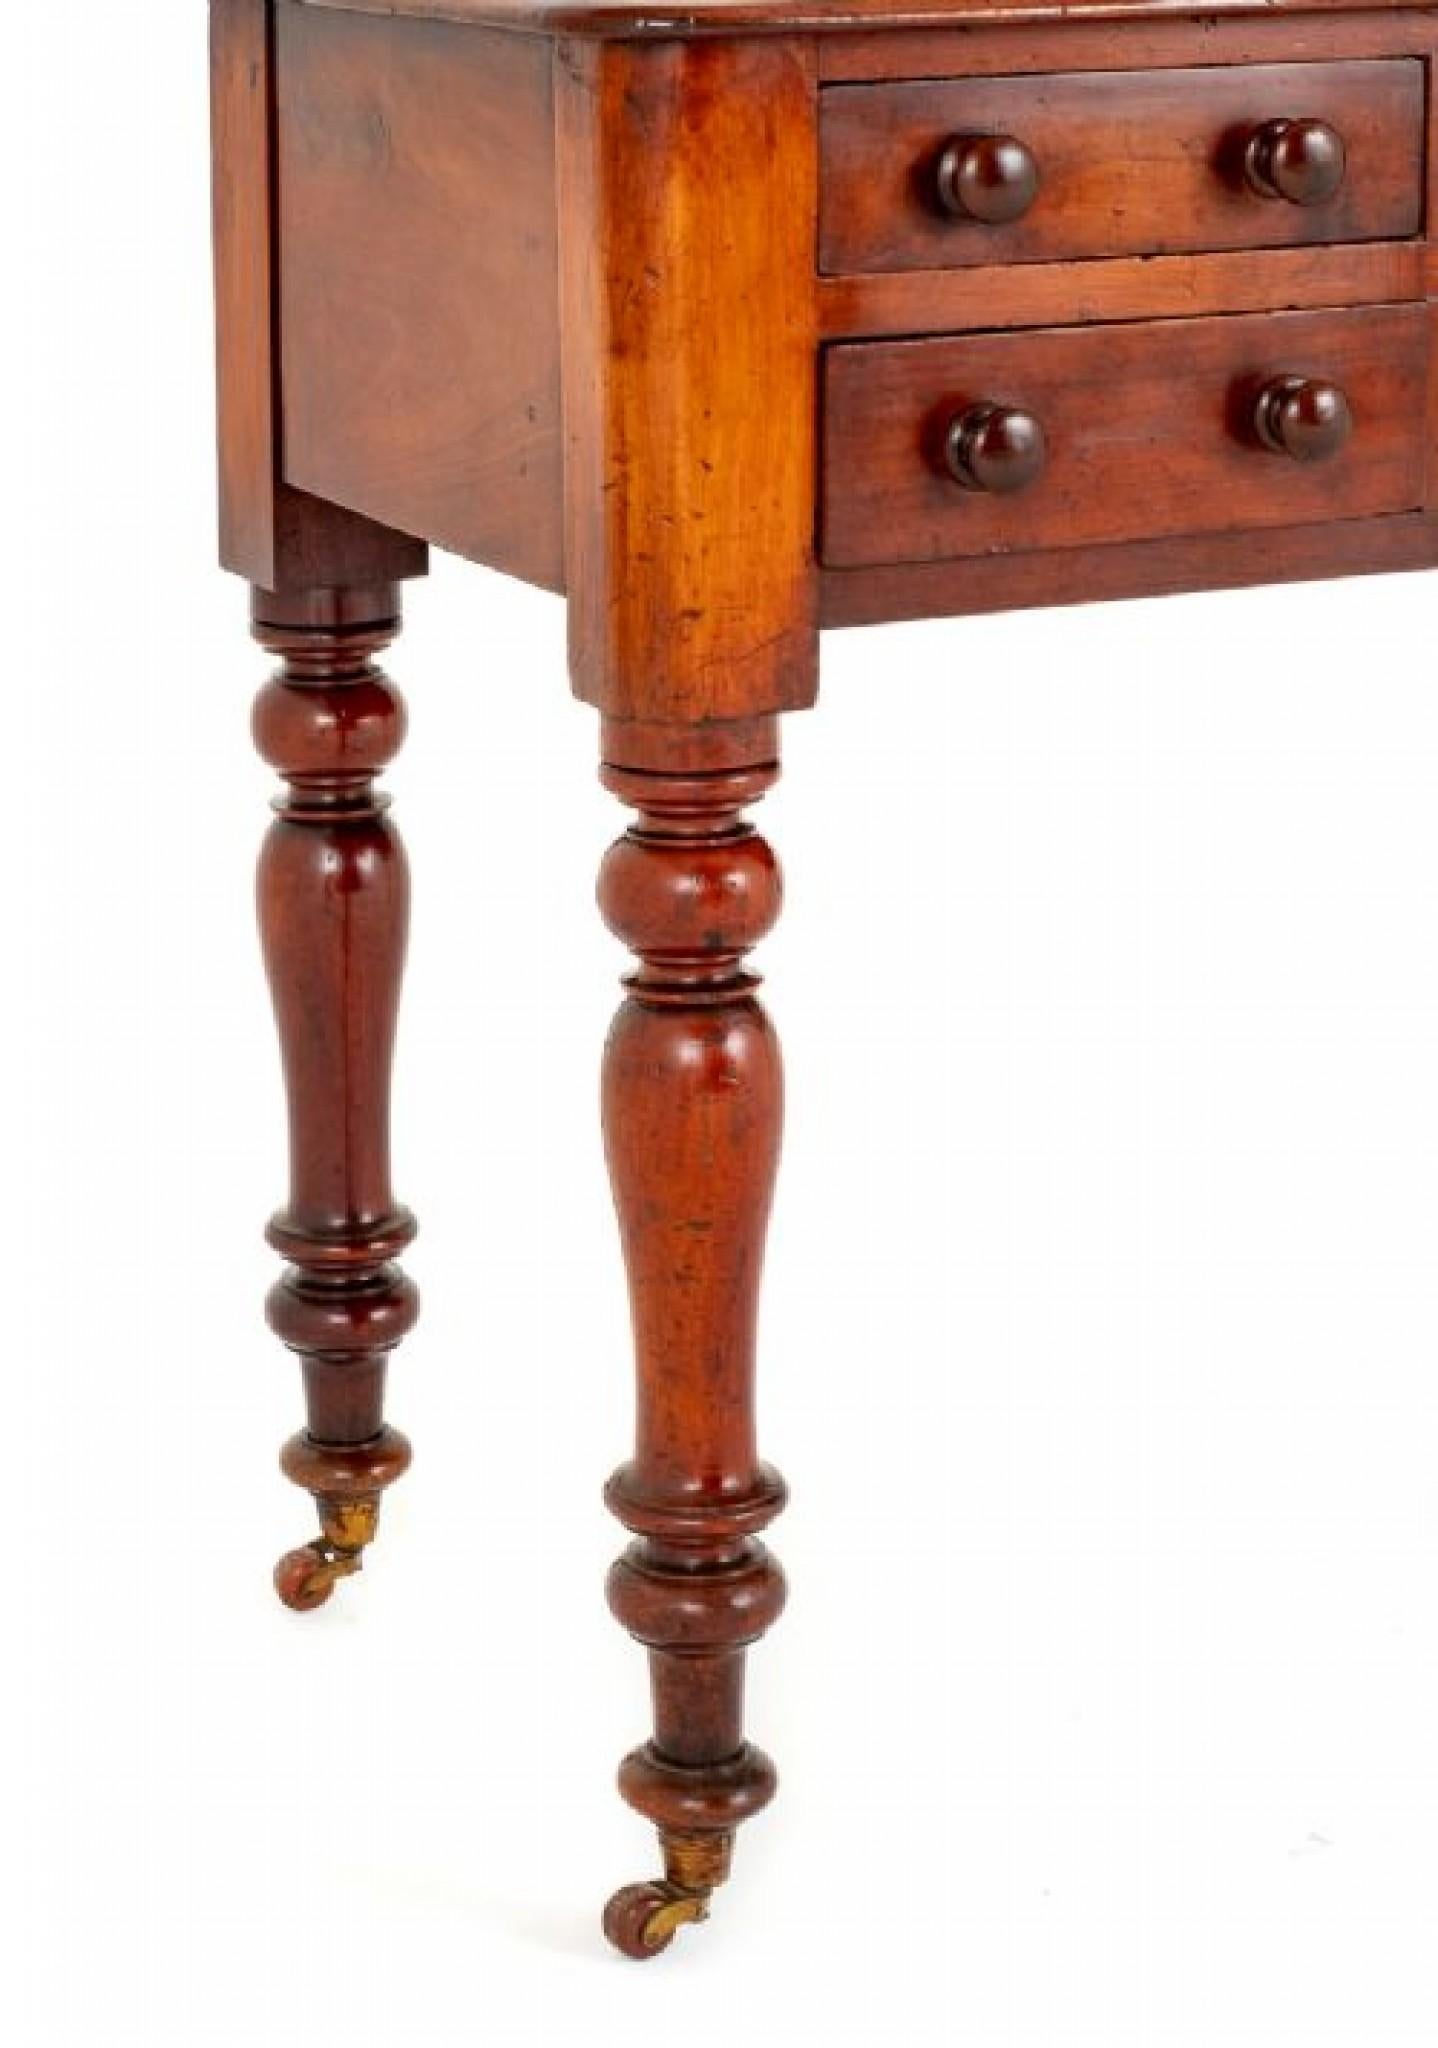 Antique Writing Table Victorian Mahogany Desk 1870 For Sale 1